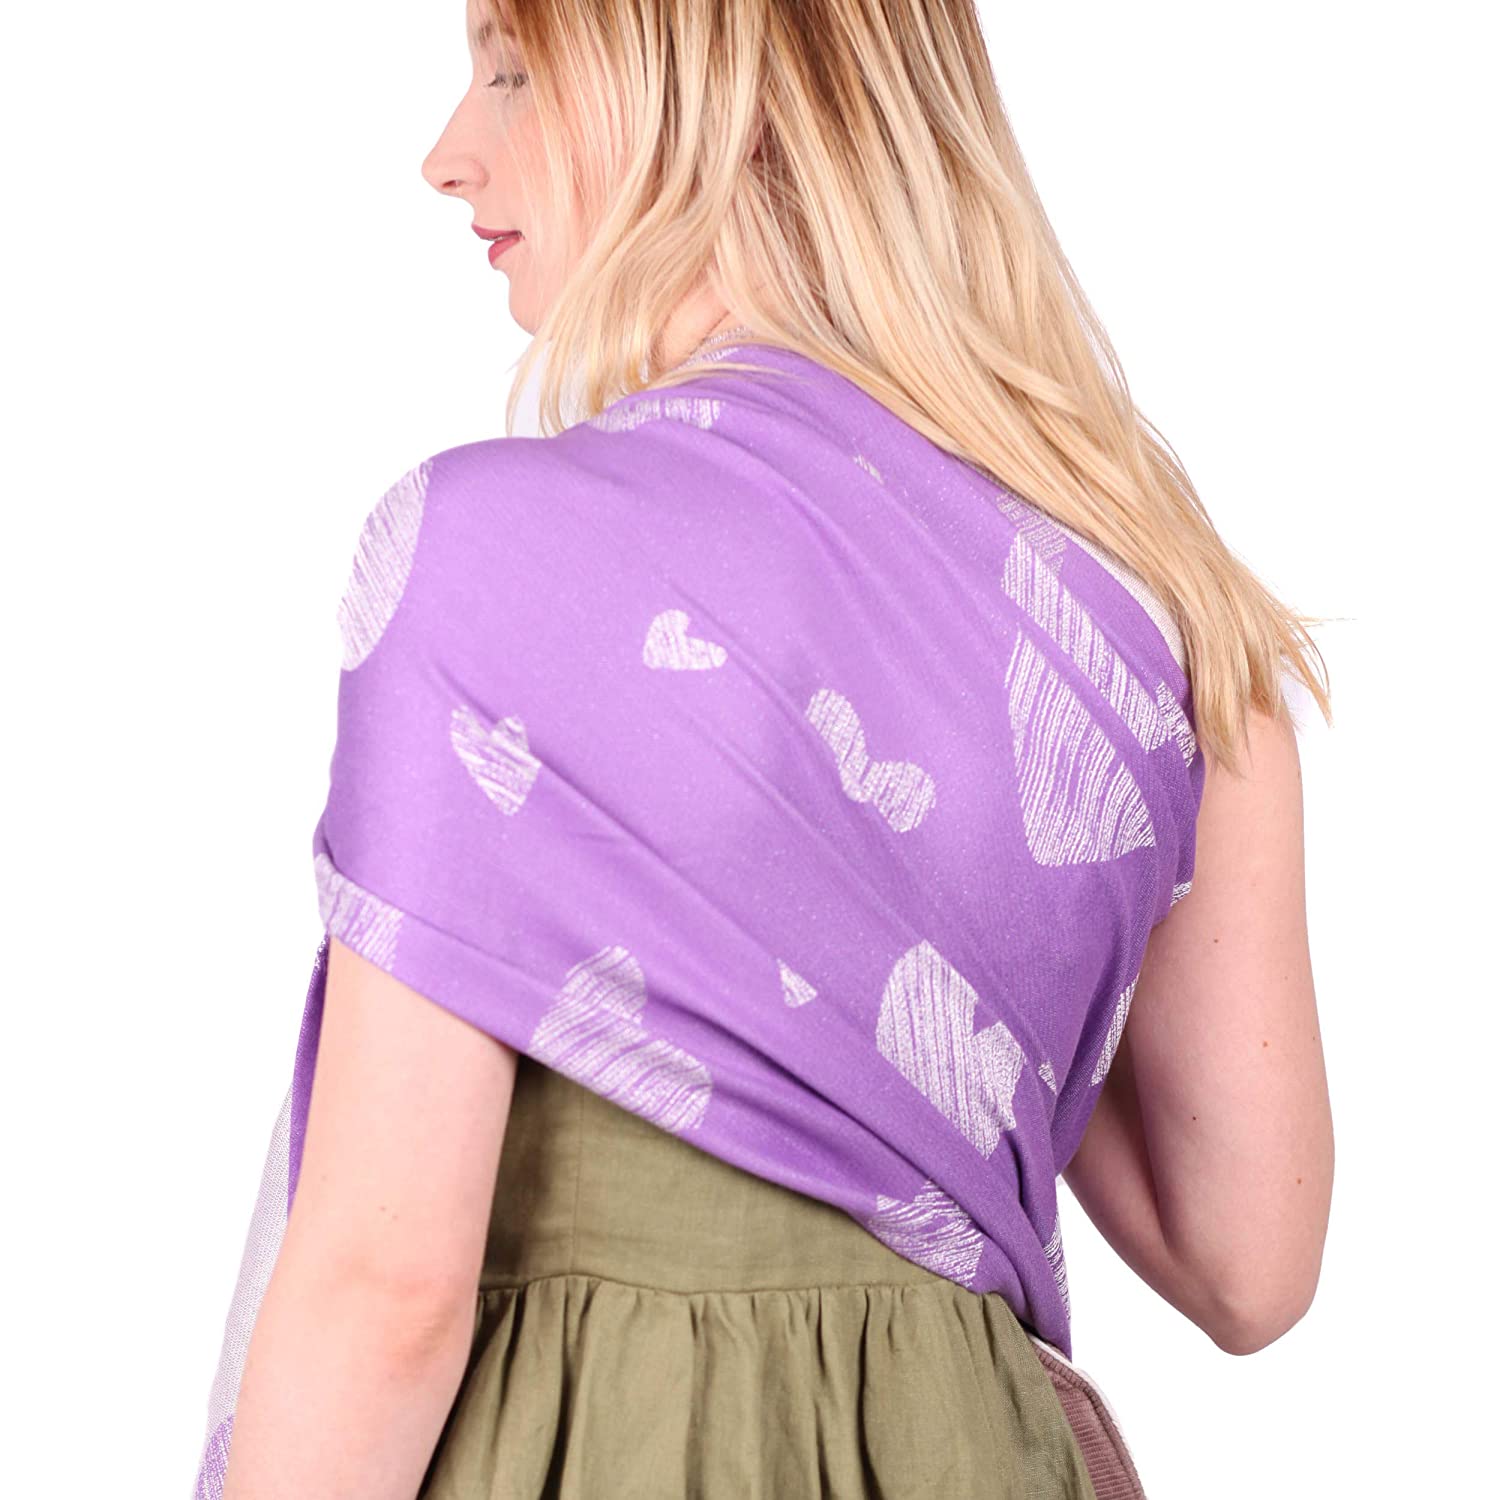 Schmusewolke Ring Sling Baby Sling Ruffled Jacquard Heartline Violet Shine Organic Cotton 70 x 215 cm Baby Size Toddler Size Newborn and Toddlers 0-60 Months 3-16 kg Hip Carrier